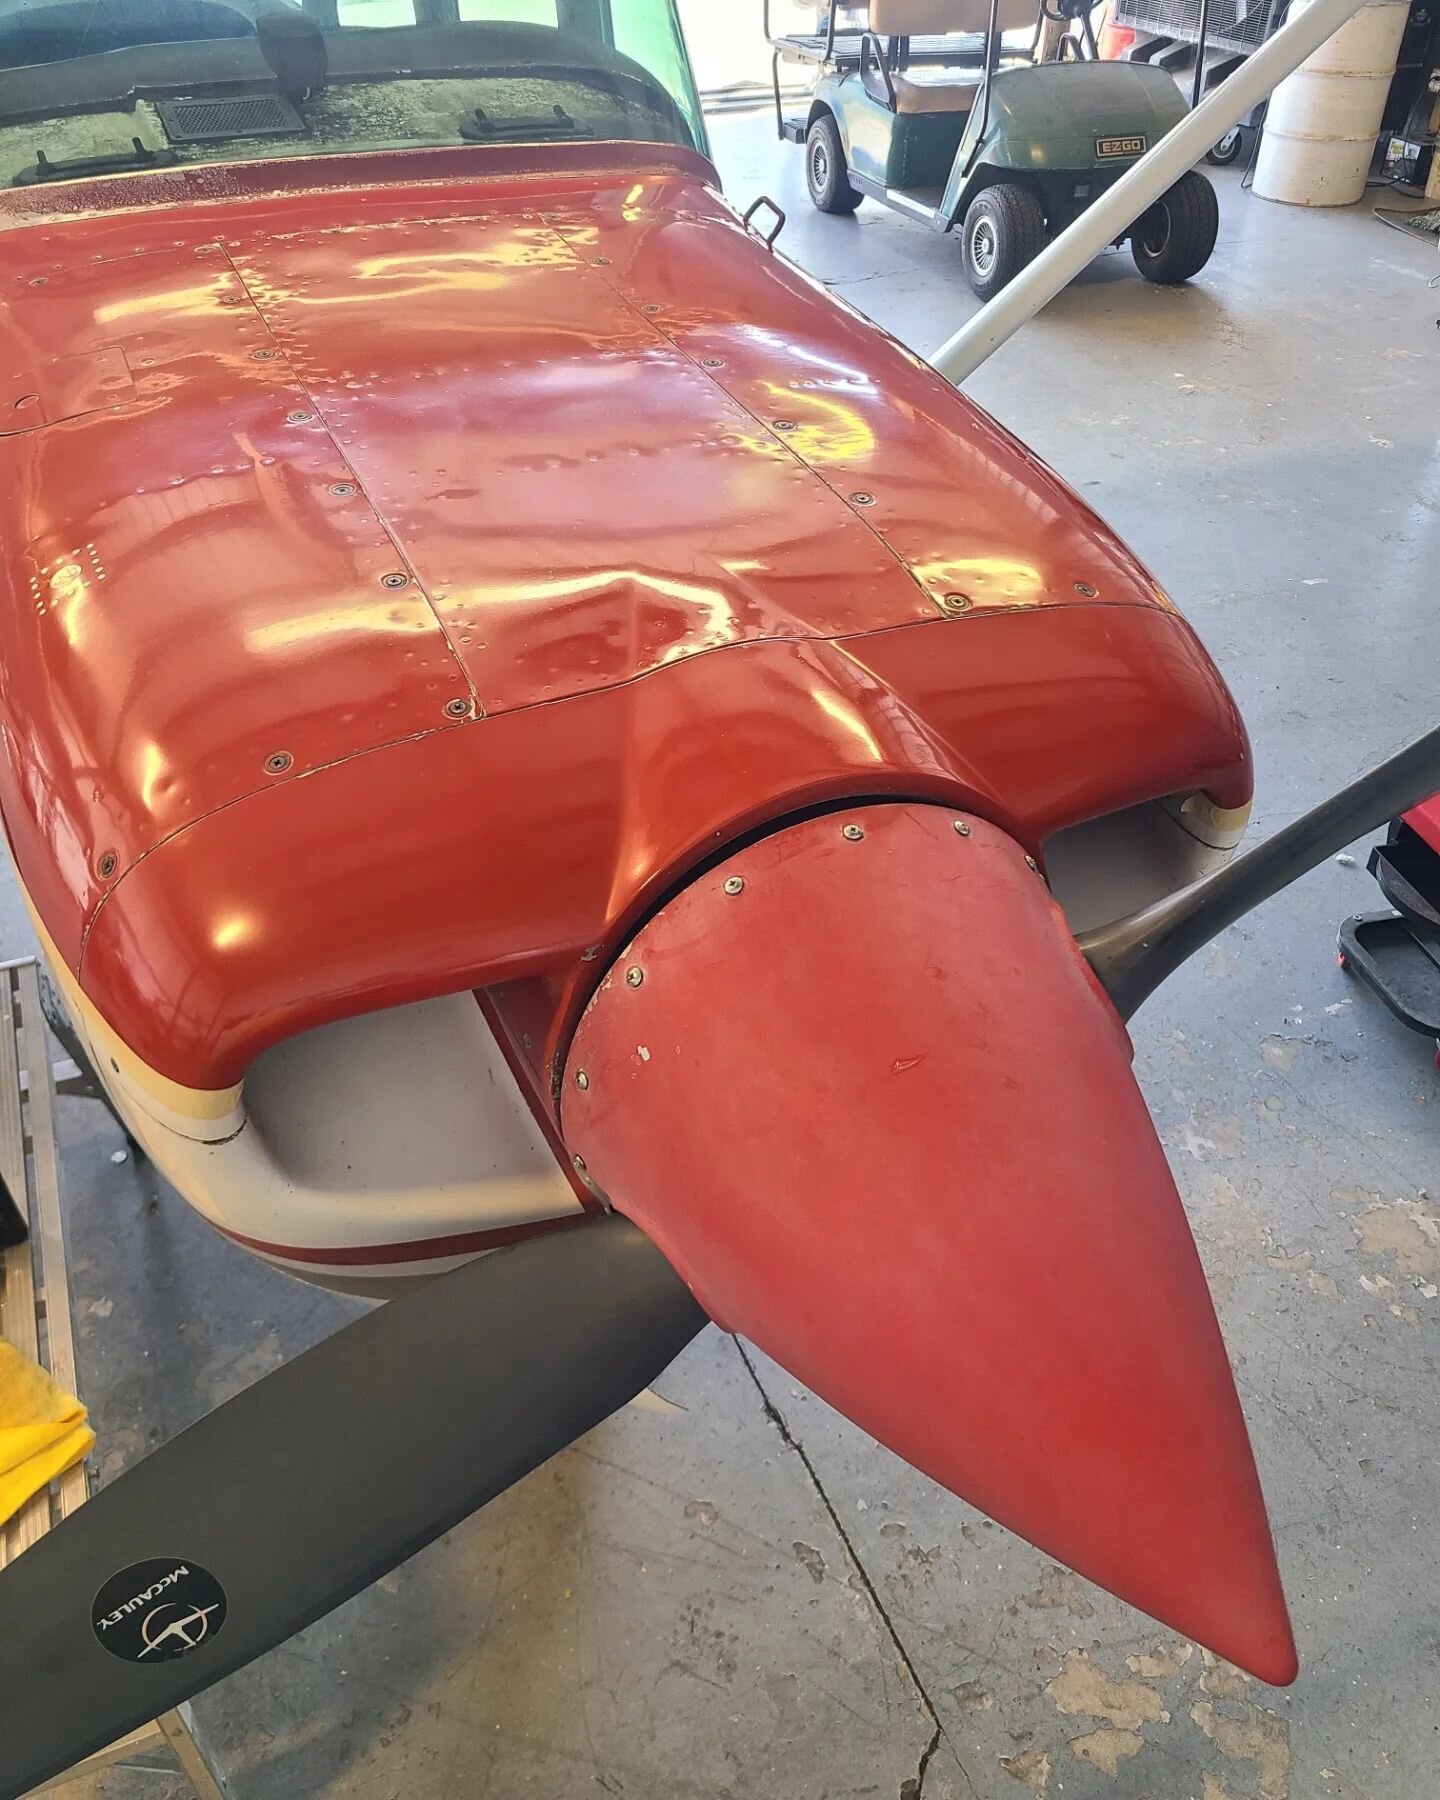 Our RG cutlass getting in house treatment. The red needed to be rejuvenated, Look at it pop now! 🤩

#aircraftdetail #aircraftbuffandwax 
#flightschool #learntofly #asel #ppl #cessna172 #cessna #cessna150 #cessna172rg #riversidemunicipalairport #kral